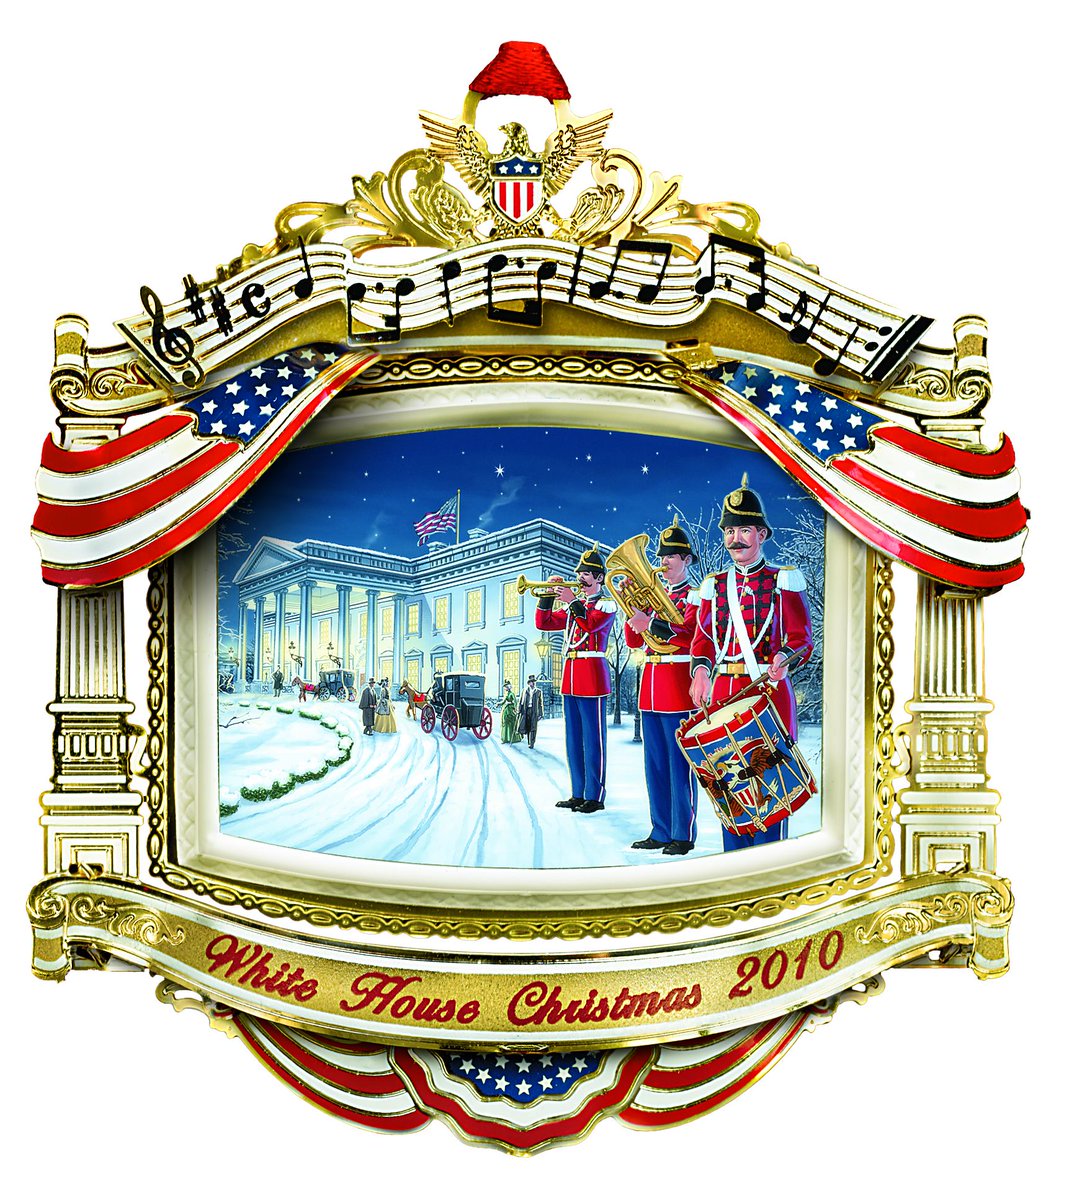 The 2010 ornament remembers the administration of William McKinley and honors the role of music during White House events. The McKinleys began the tradition of receptions with music as the leading feature, which continues to this day. https://shop.whitehousehistory.org/holidays/ornaments/the-2010-white-house-christmas-the-united-states-marine-band-honoring-william-mckinley-25th-president-of-the-united-states-1897-1901